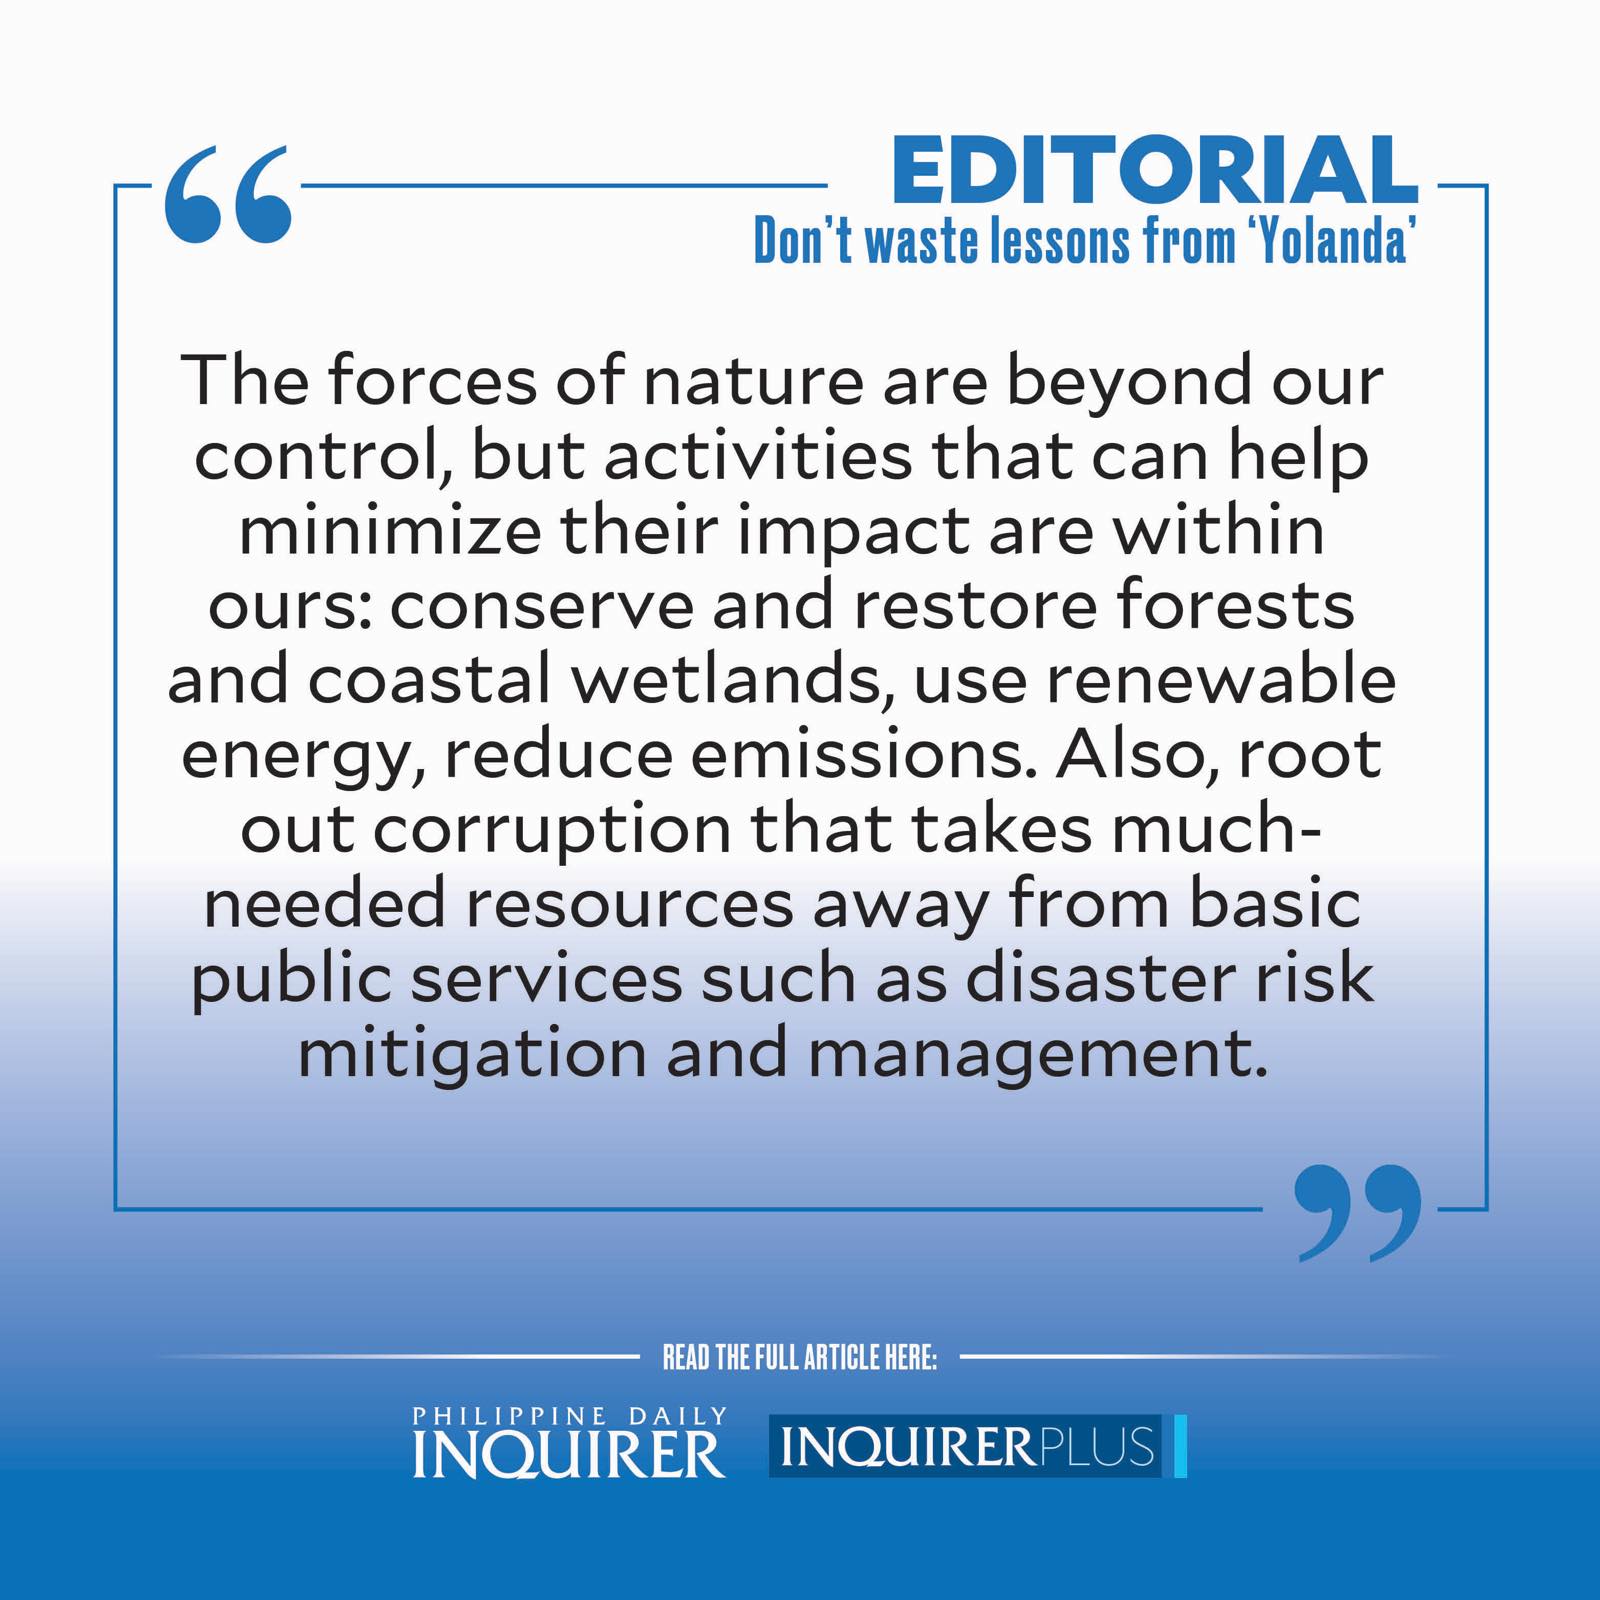 QUOTE CARD FOR EDITORIAL: Don’t waste lessons from Yolanda